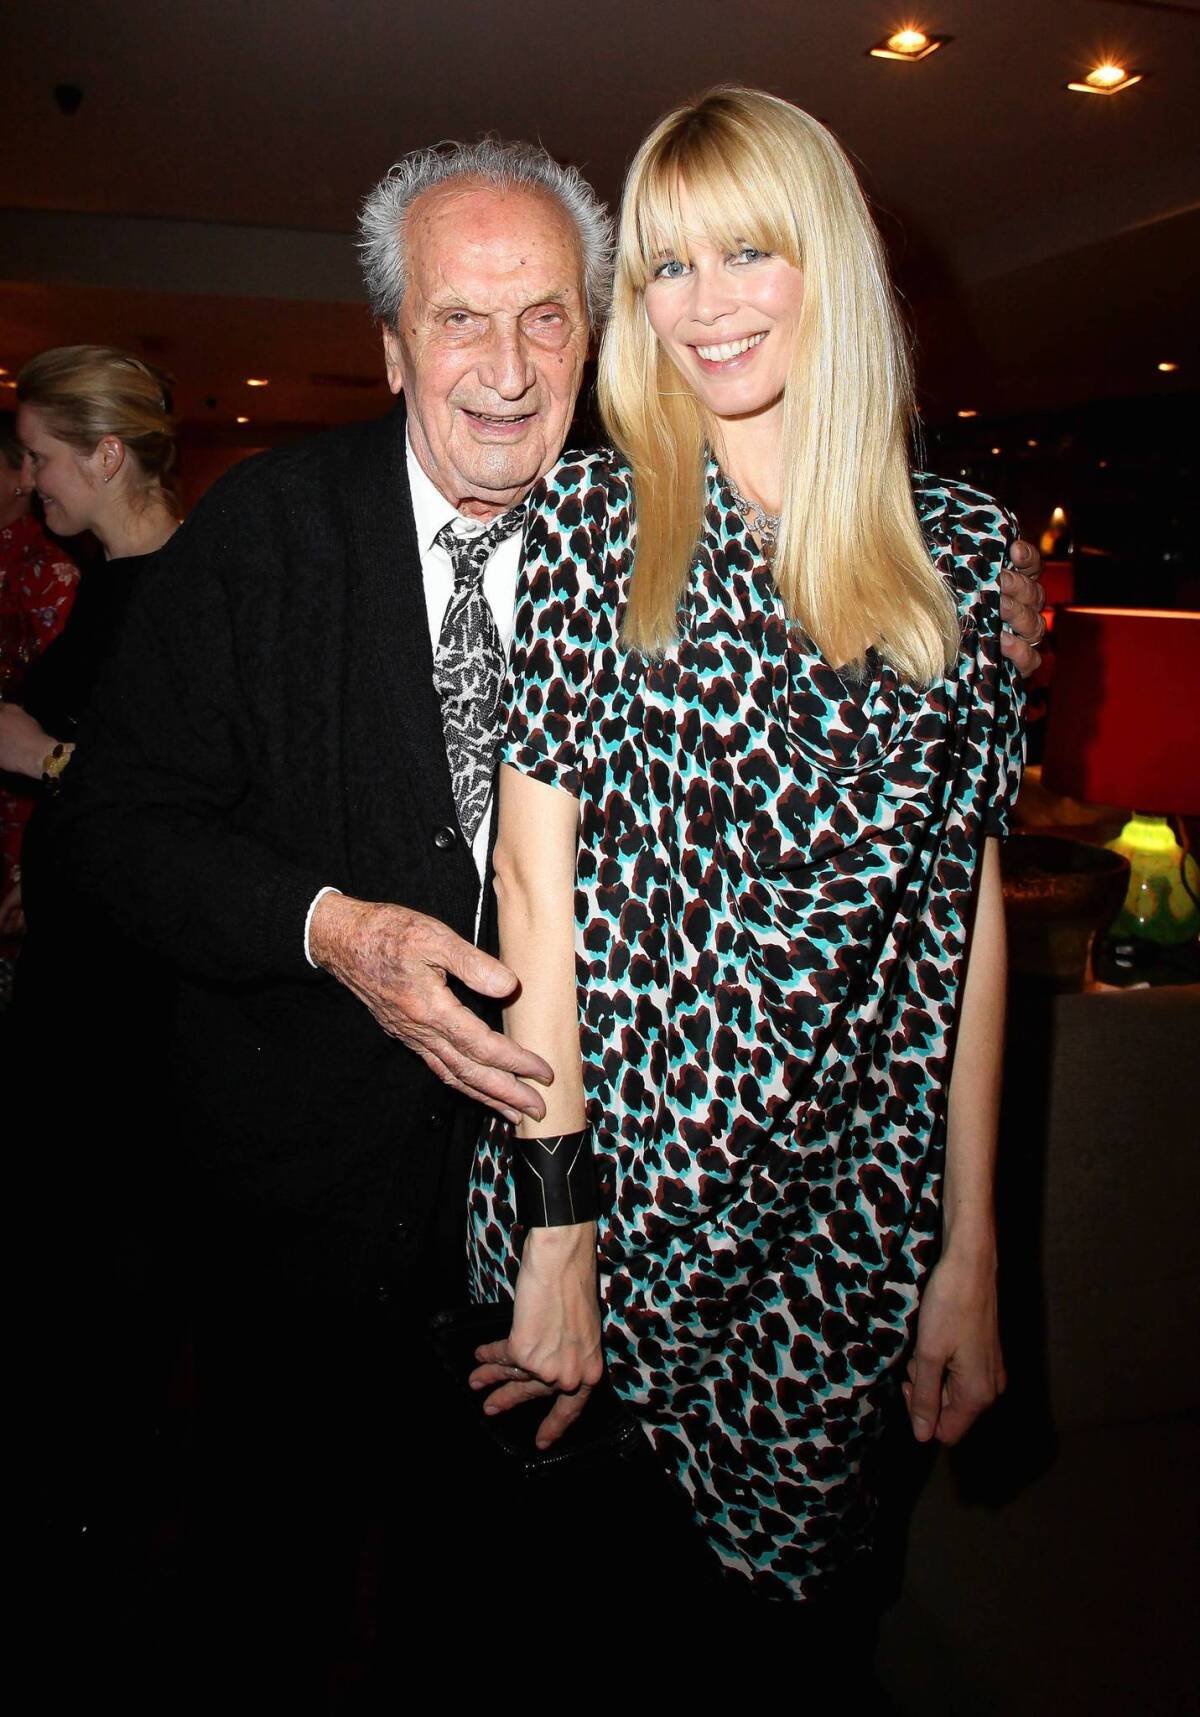 Ottavio Missoni visits with Claudia Schiffer at a Berlin event in 2009. The Italian fashion patriarch died Thursday at 92.